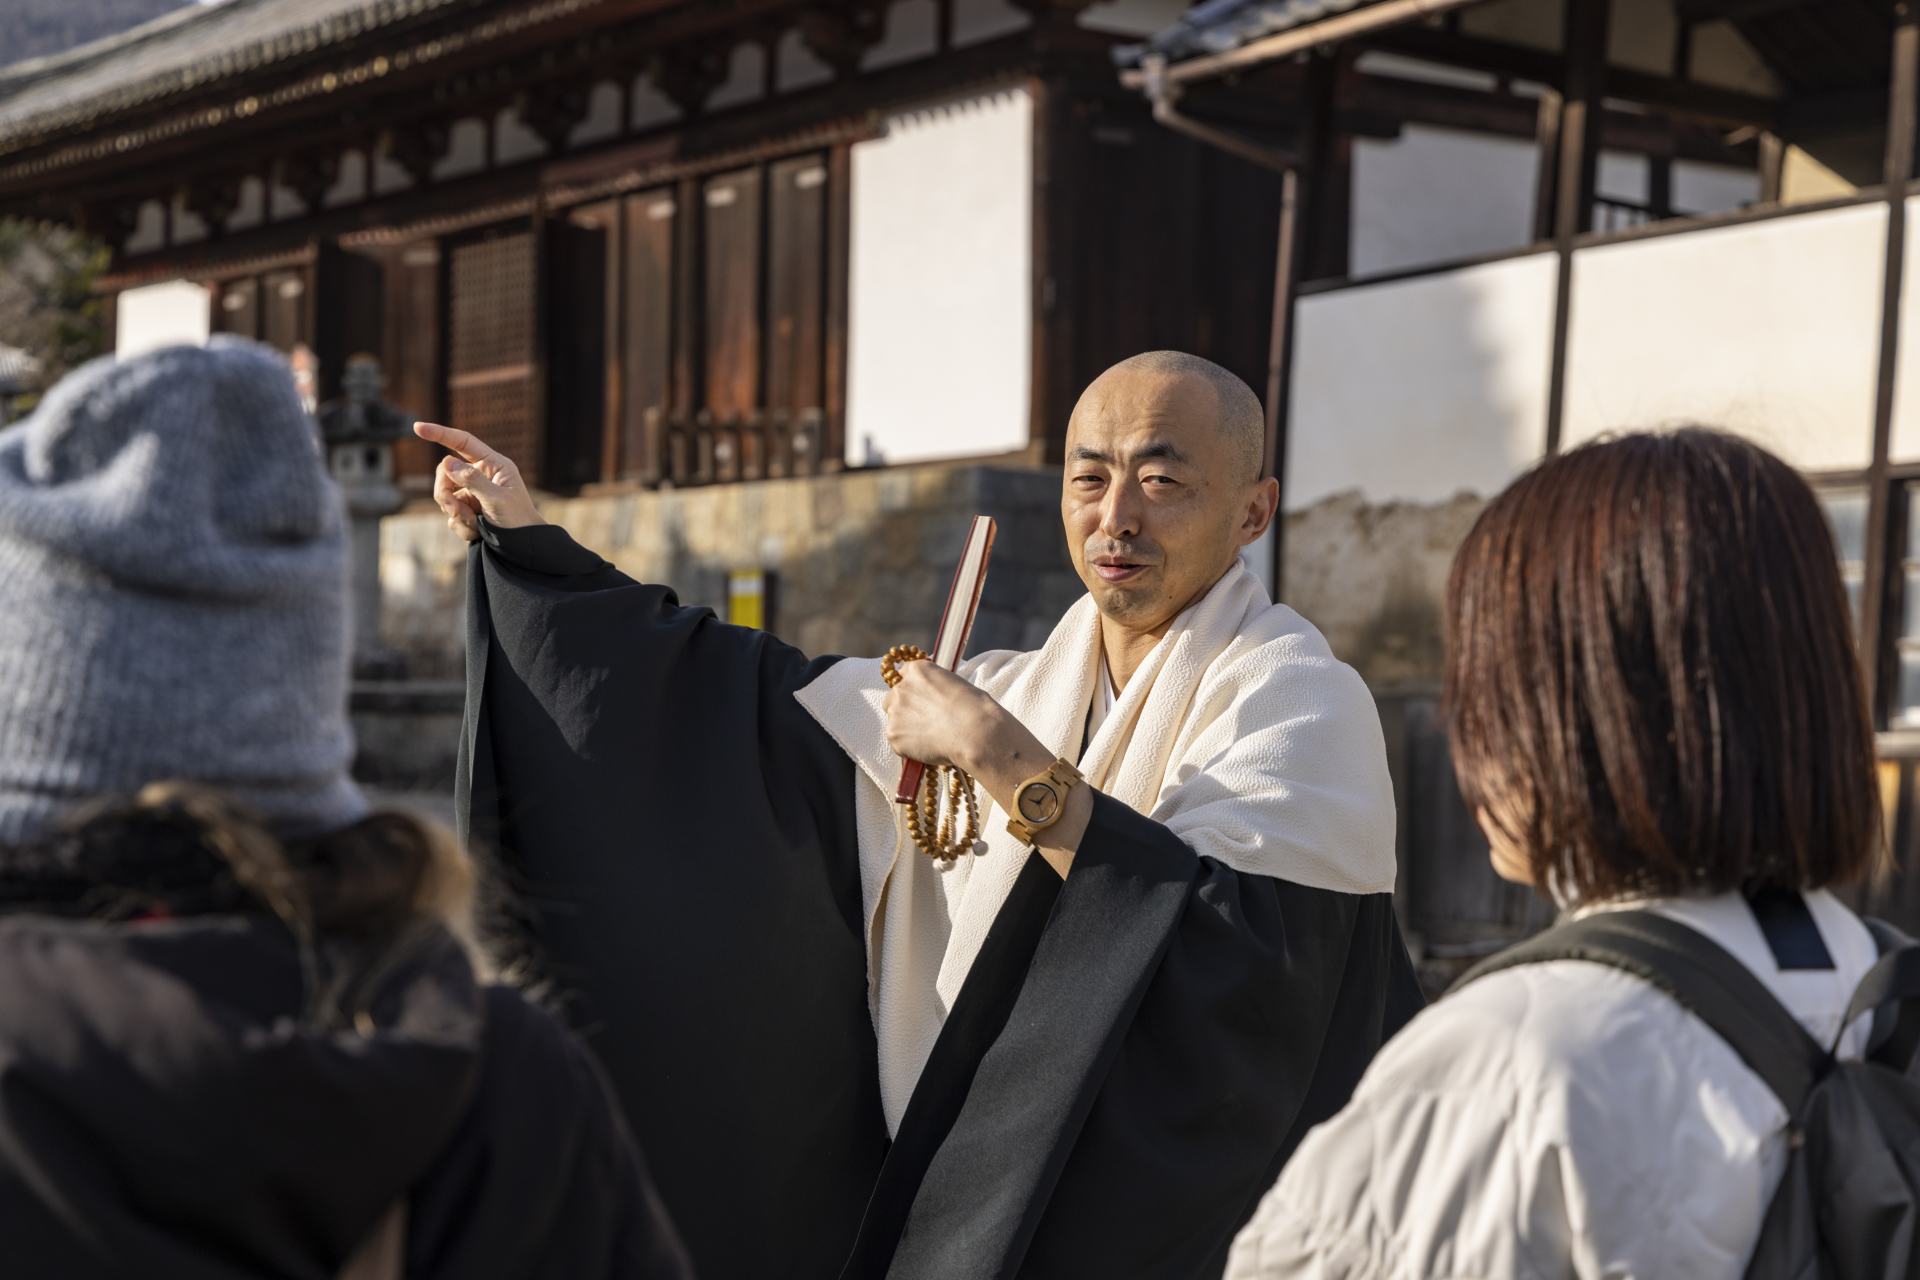 Getting a private tour by the temple’s monk is a great way to pique your curiosity in order to have your questions answered and discover new aspects of historic temples.